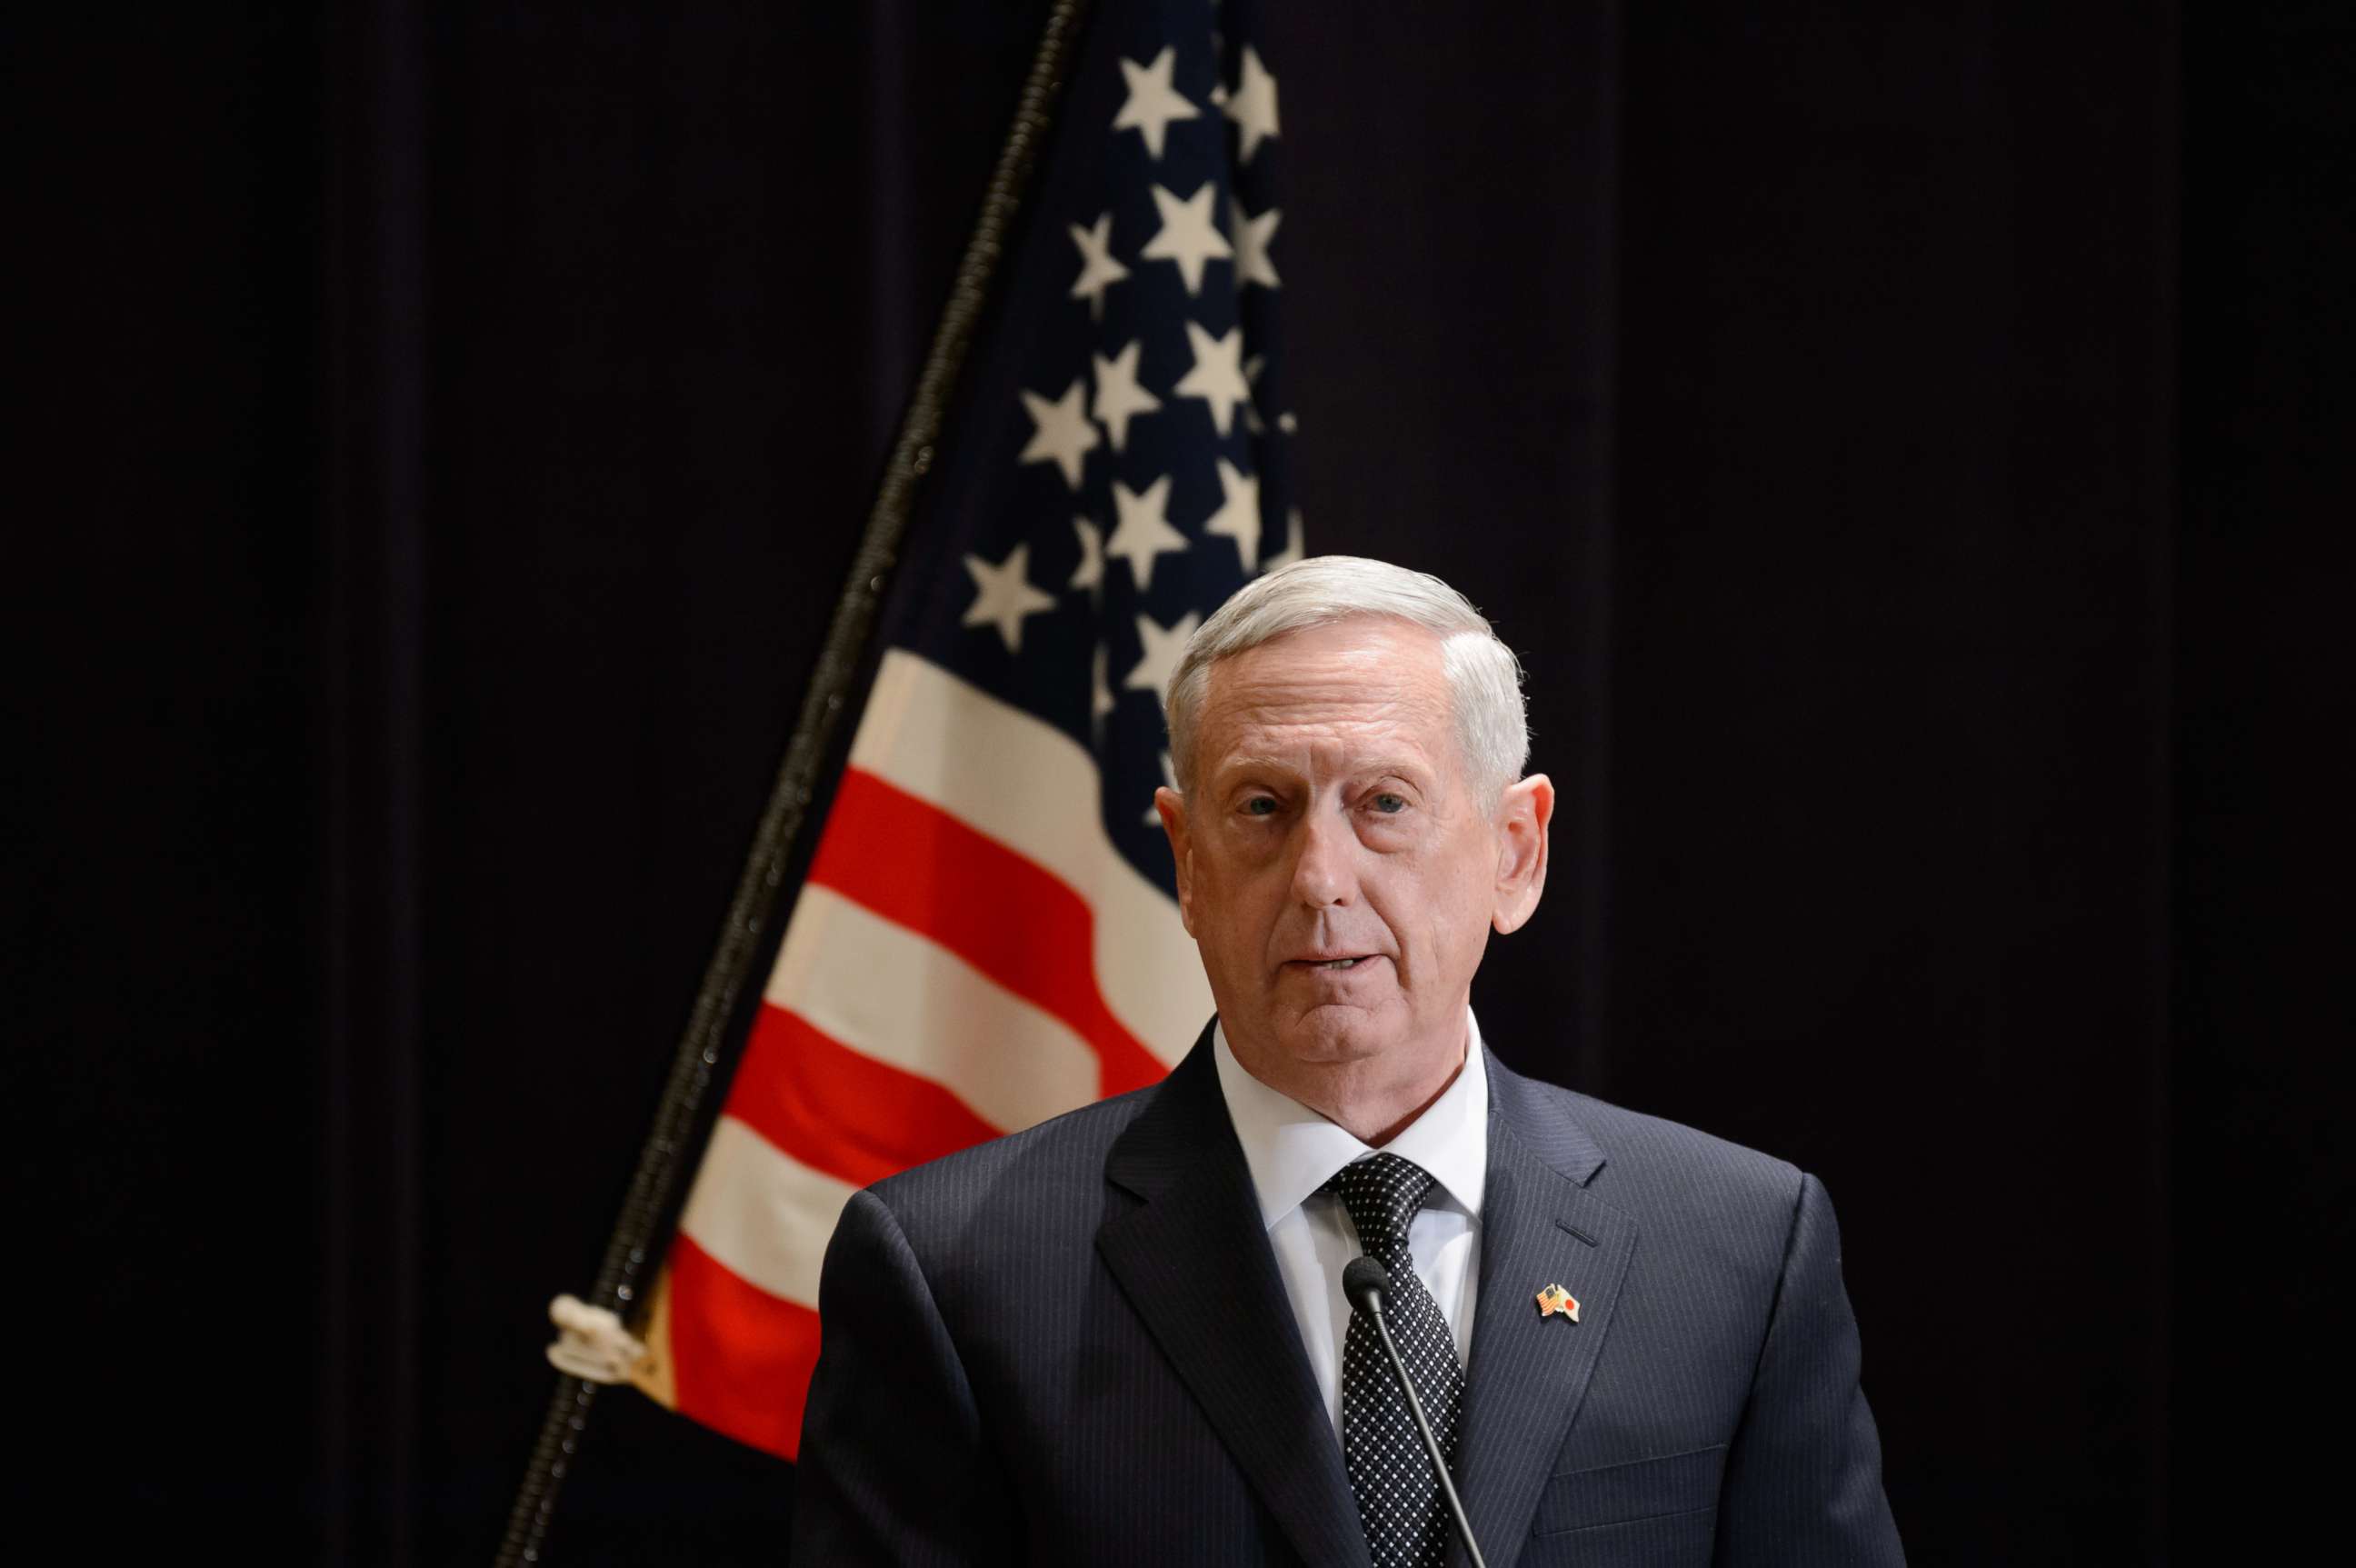 PHOTO: General James Mattis, U.S. secretary of defense, speaks during a news conference with Tomomi Inada, Japan's defense minister, not pictured, in Tokyo, Japan, on Saturday, Feb. 4, 2017.